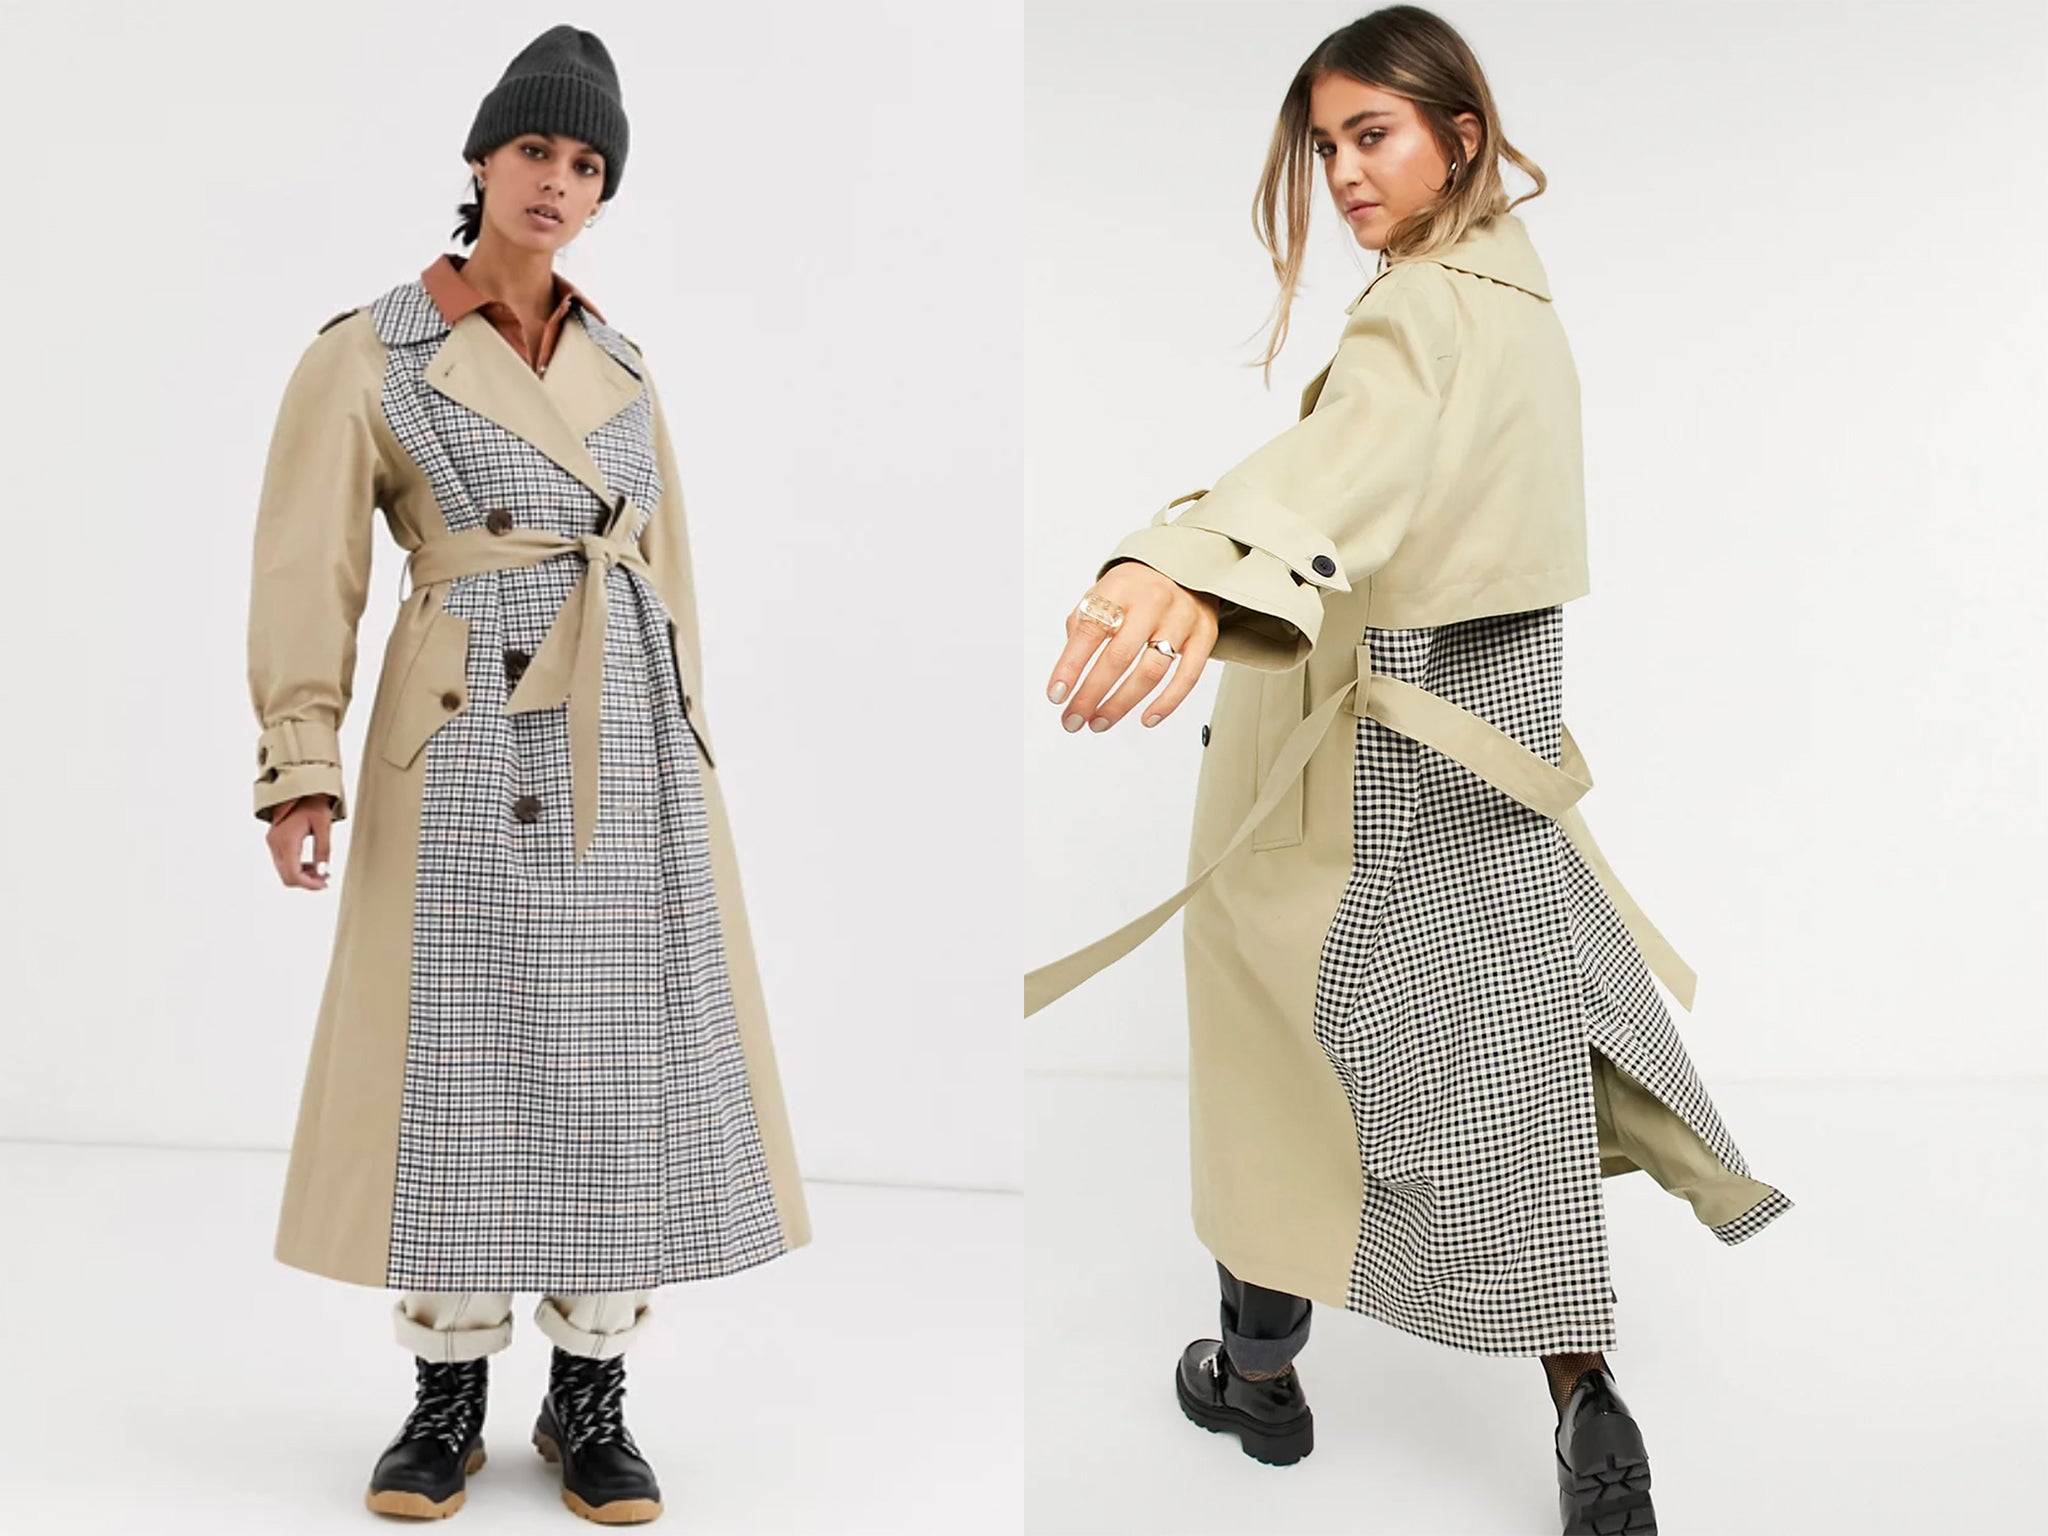 Left to right: Last year’s sell-out jacket and this year’s must-have coat